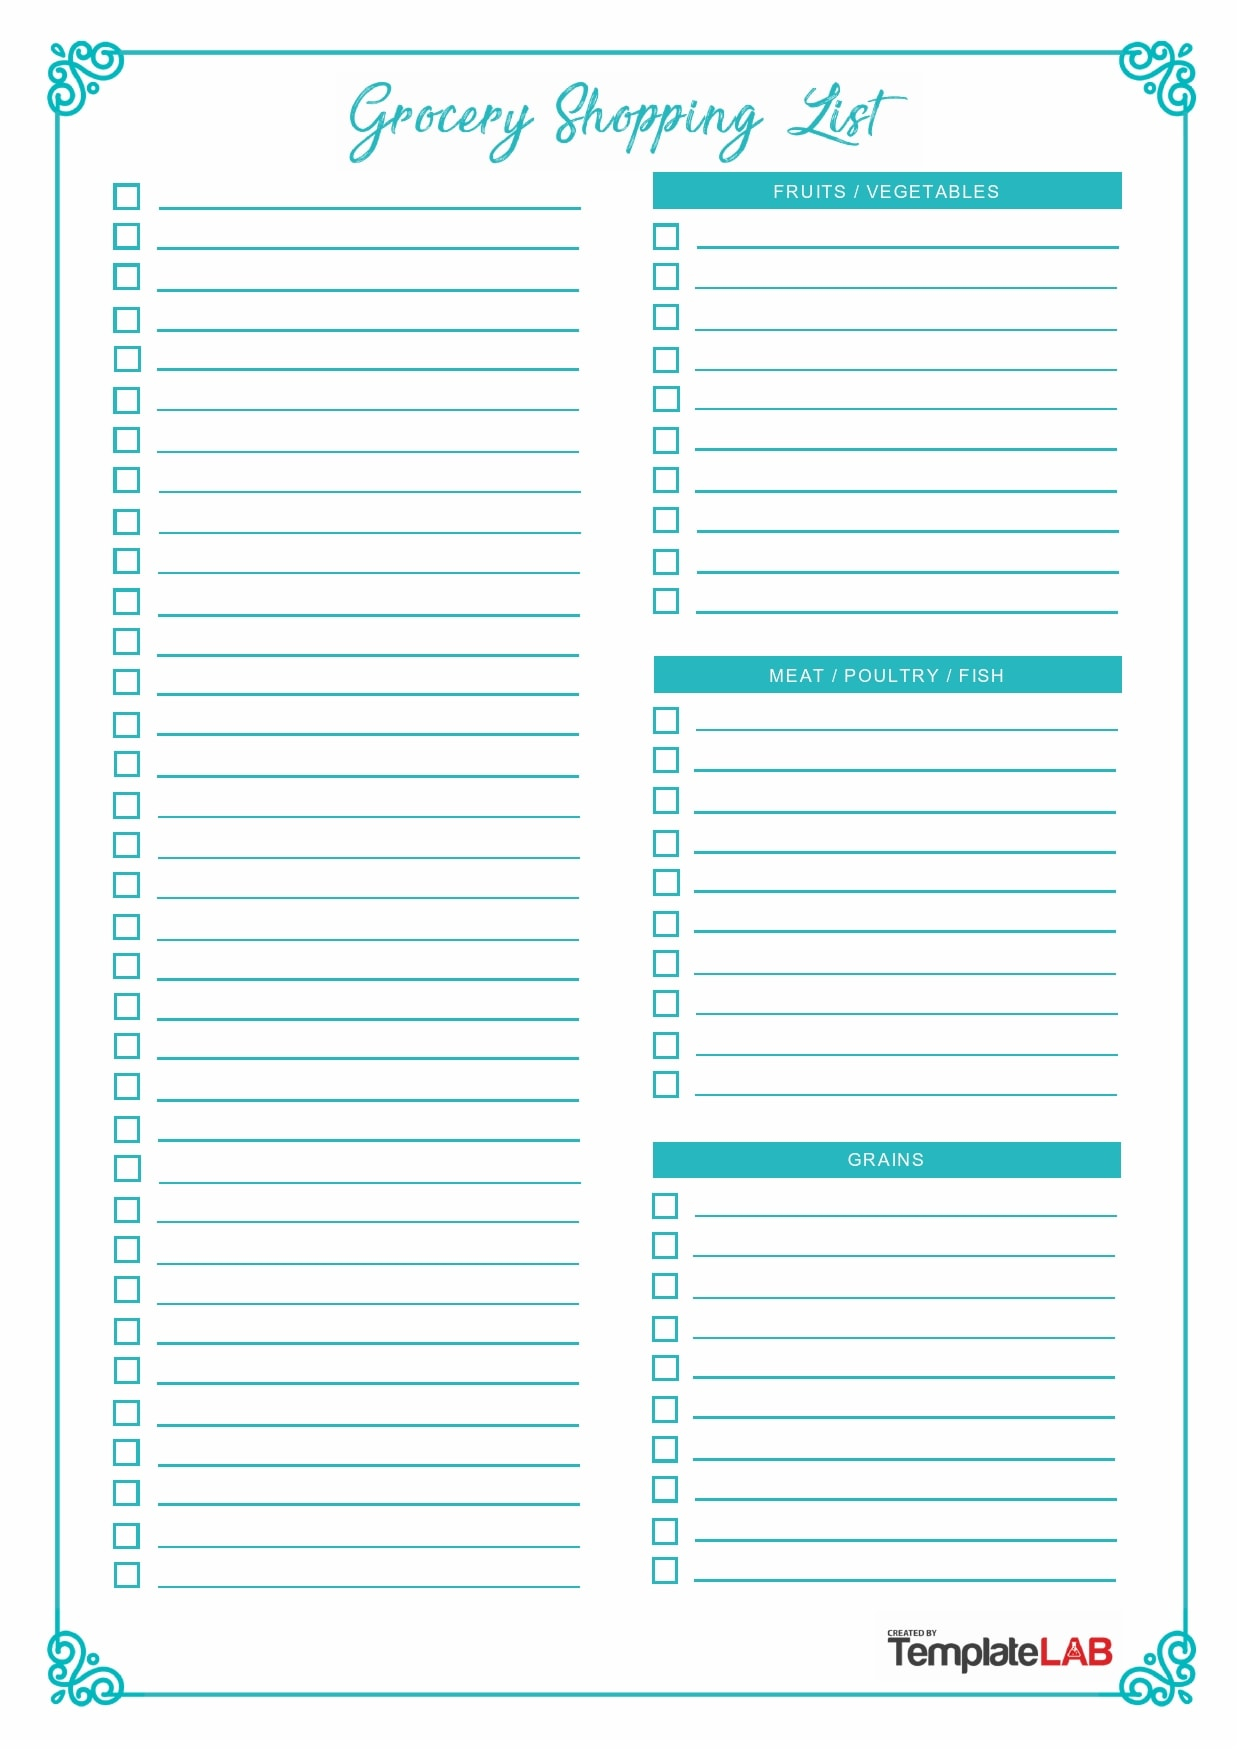 10 Useful Grocery List Templates (Shopping Lists) - PrintableTemplates Regarding Blank Grocery Shopping List Template